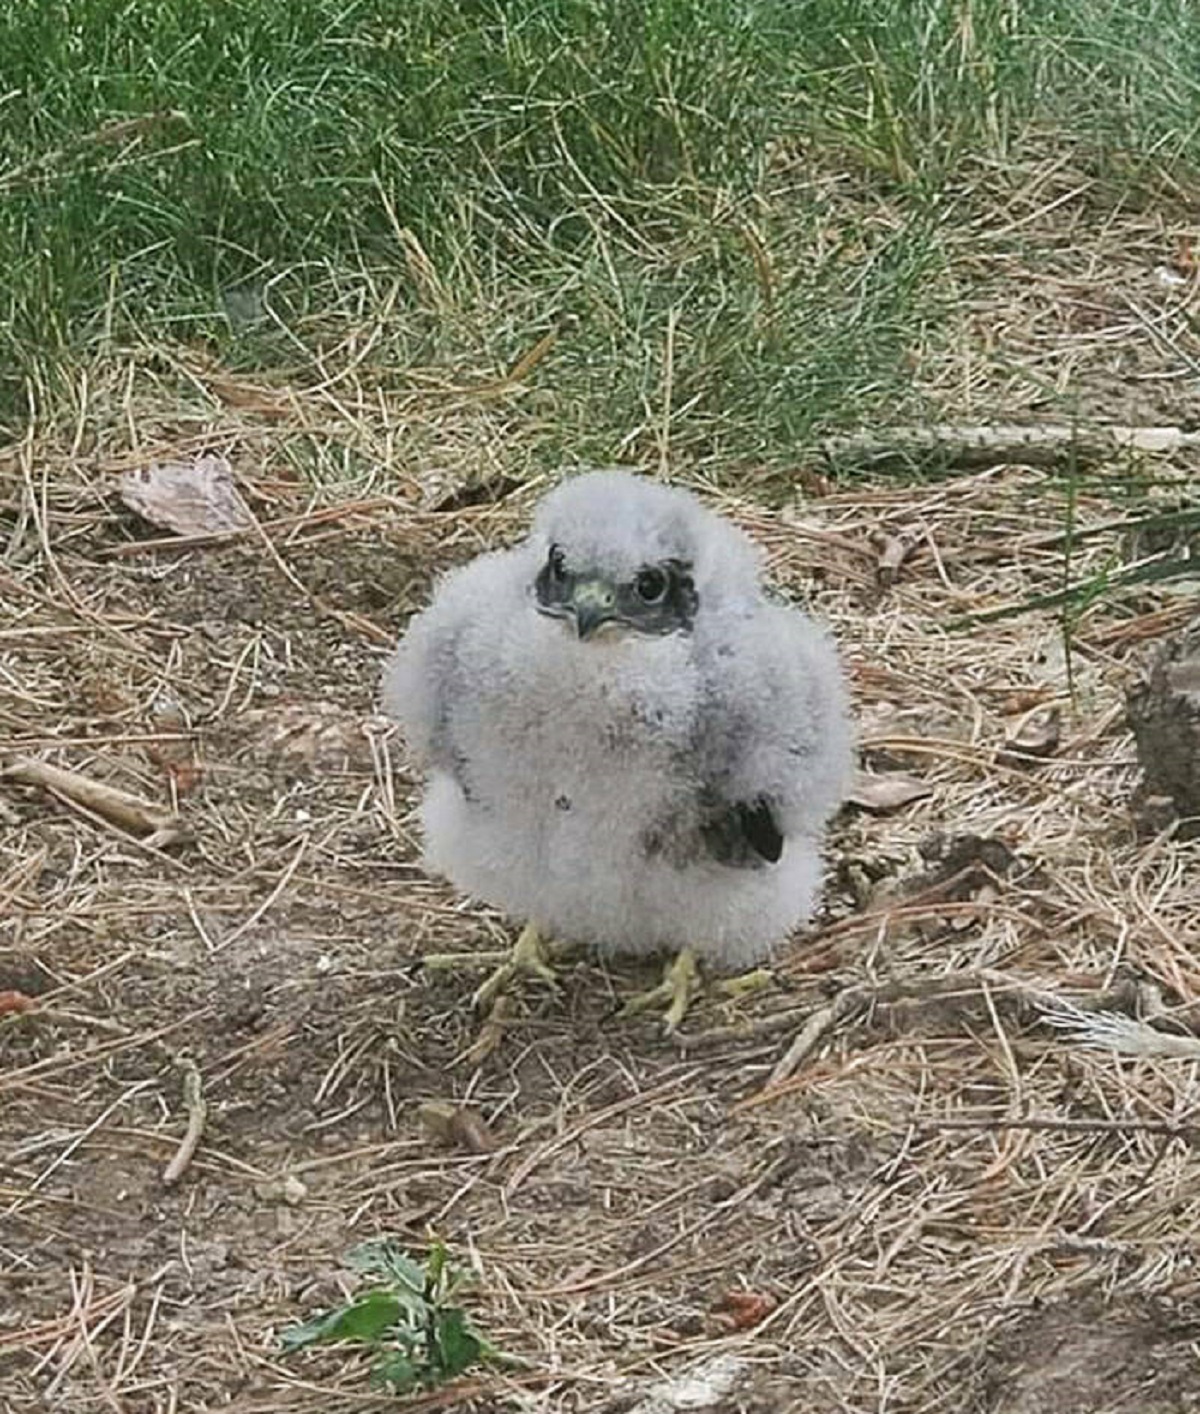 "Found In The Backyard: A Rare And Endangered Peregrine Falcon - The Fastest Bird On The Continent (The Wildlife Commission Reunited Him With His Family)"